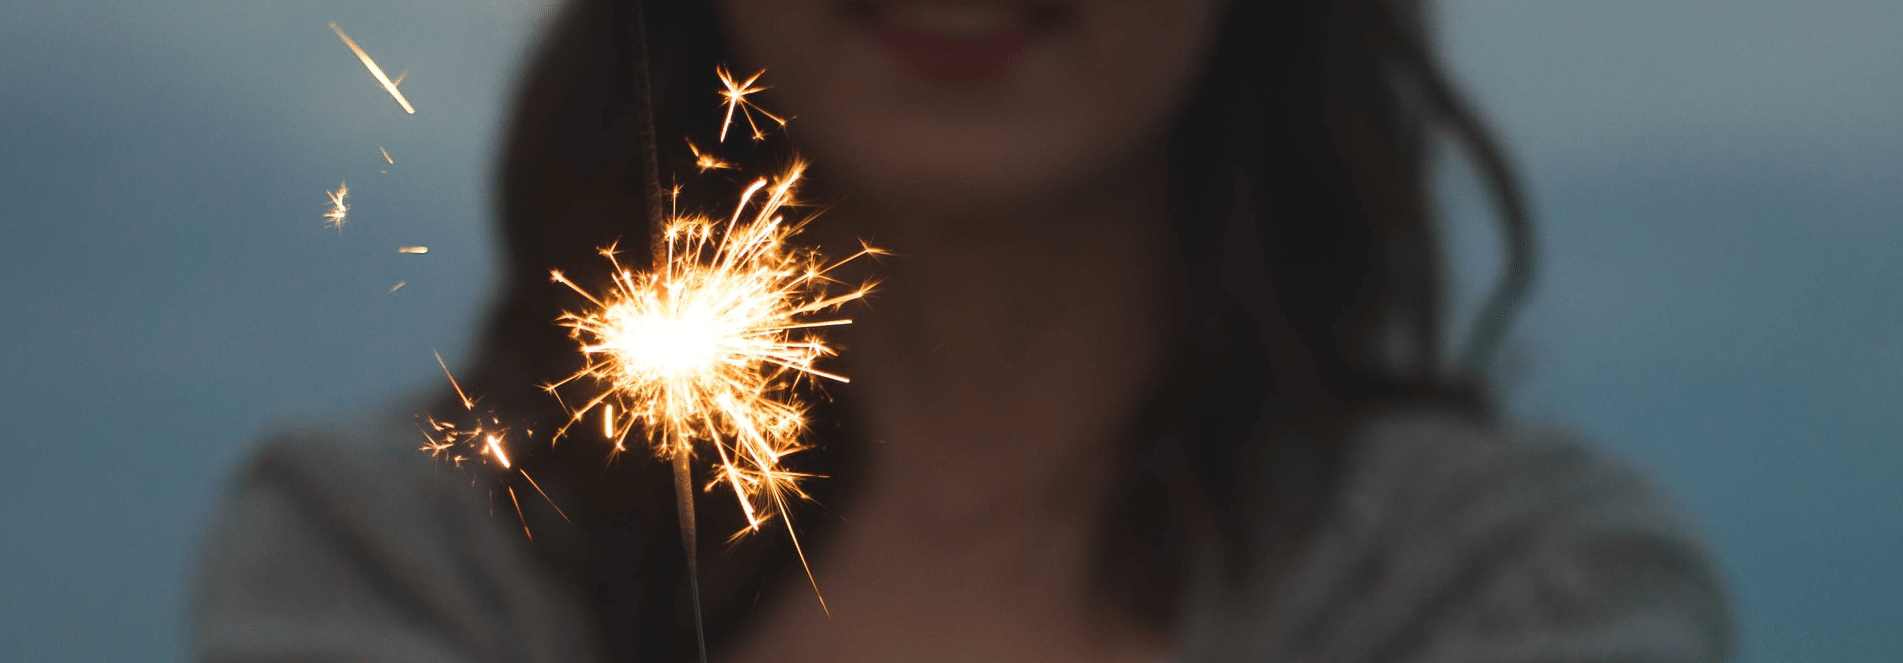 4 Tips For Using Fireworks Safely Around Your Home 